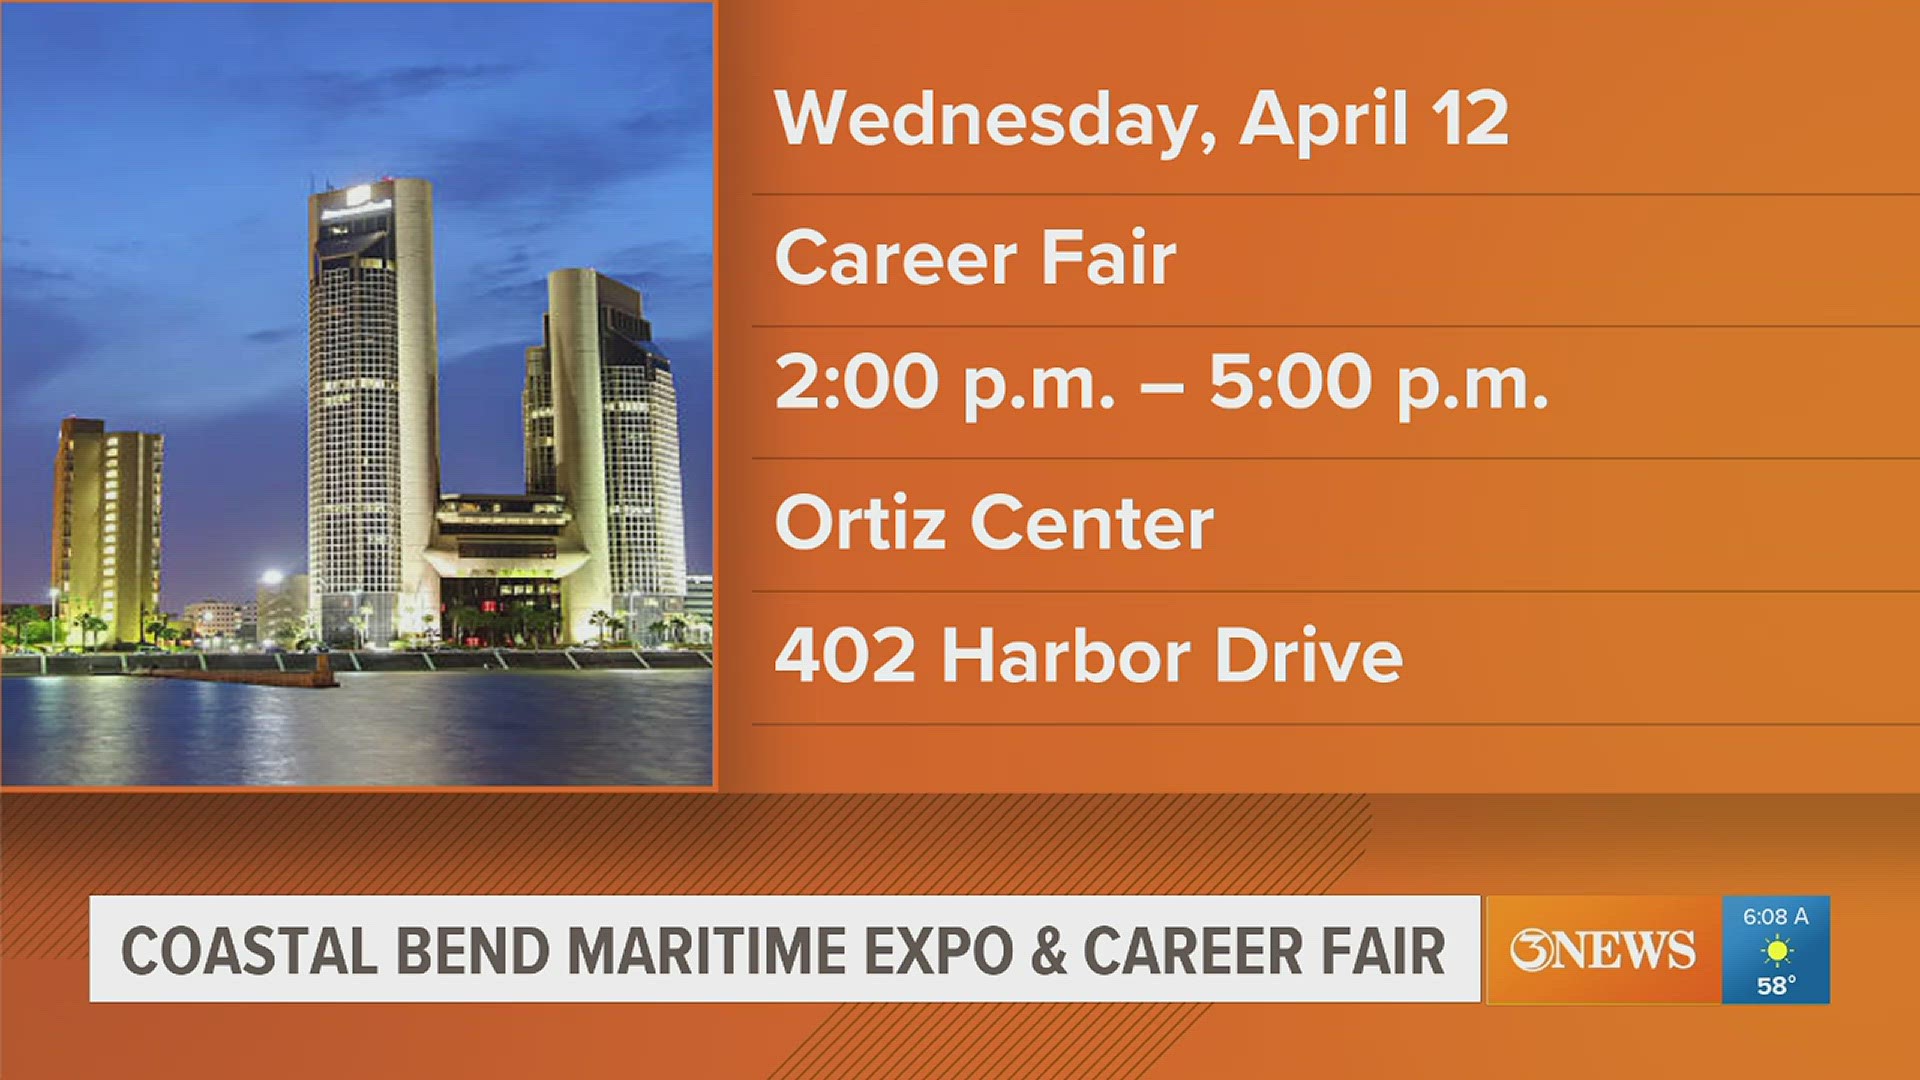 Bring your resumes and dress to impress for the Coastal Bend Maritime Expo and Career Fair on Wednesday.